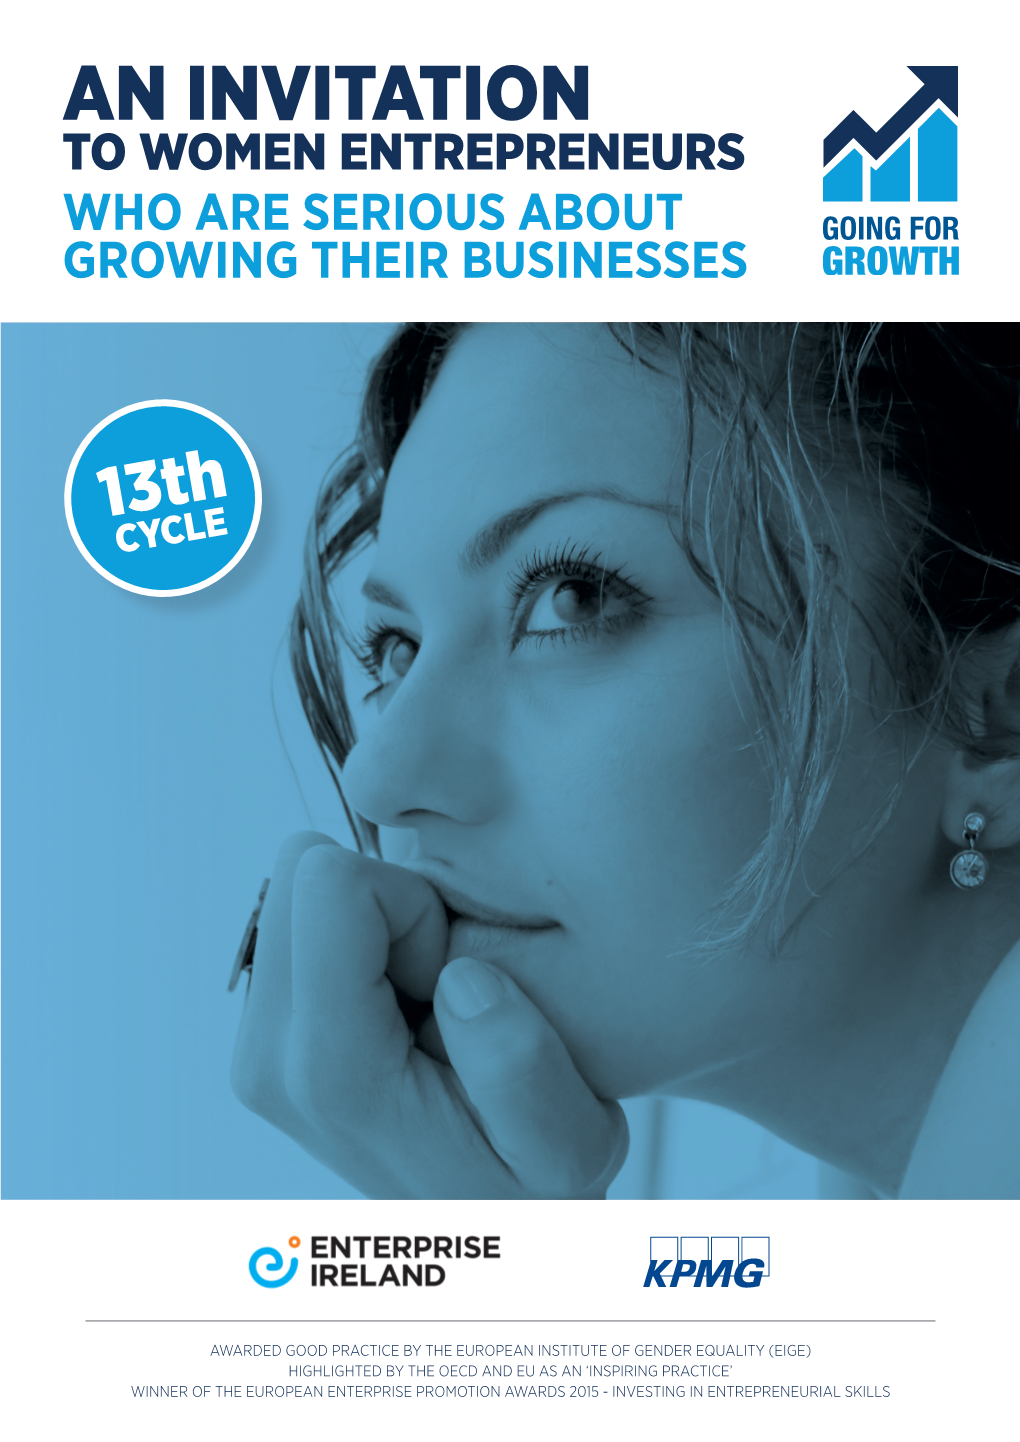 Going for Growth: an INVITATION to WOMEN ENTREPRENEURS WHO ARE SERIOUS ABOUT GROWING THEIR BUSINESSES